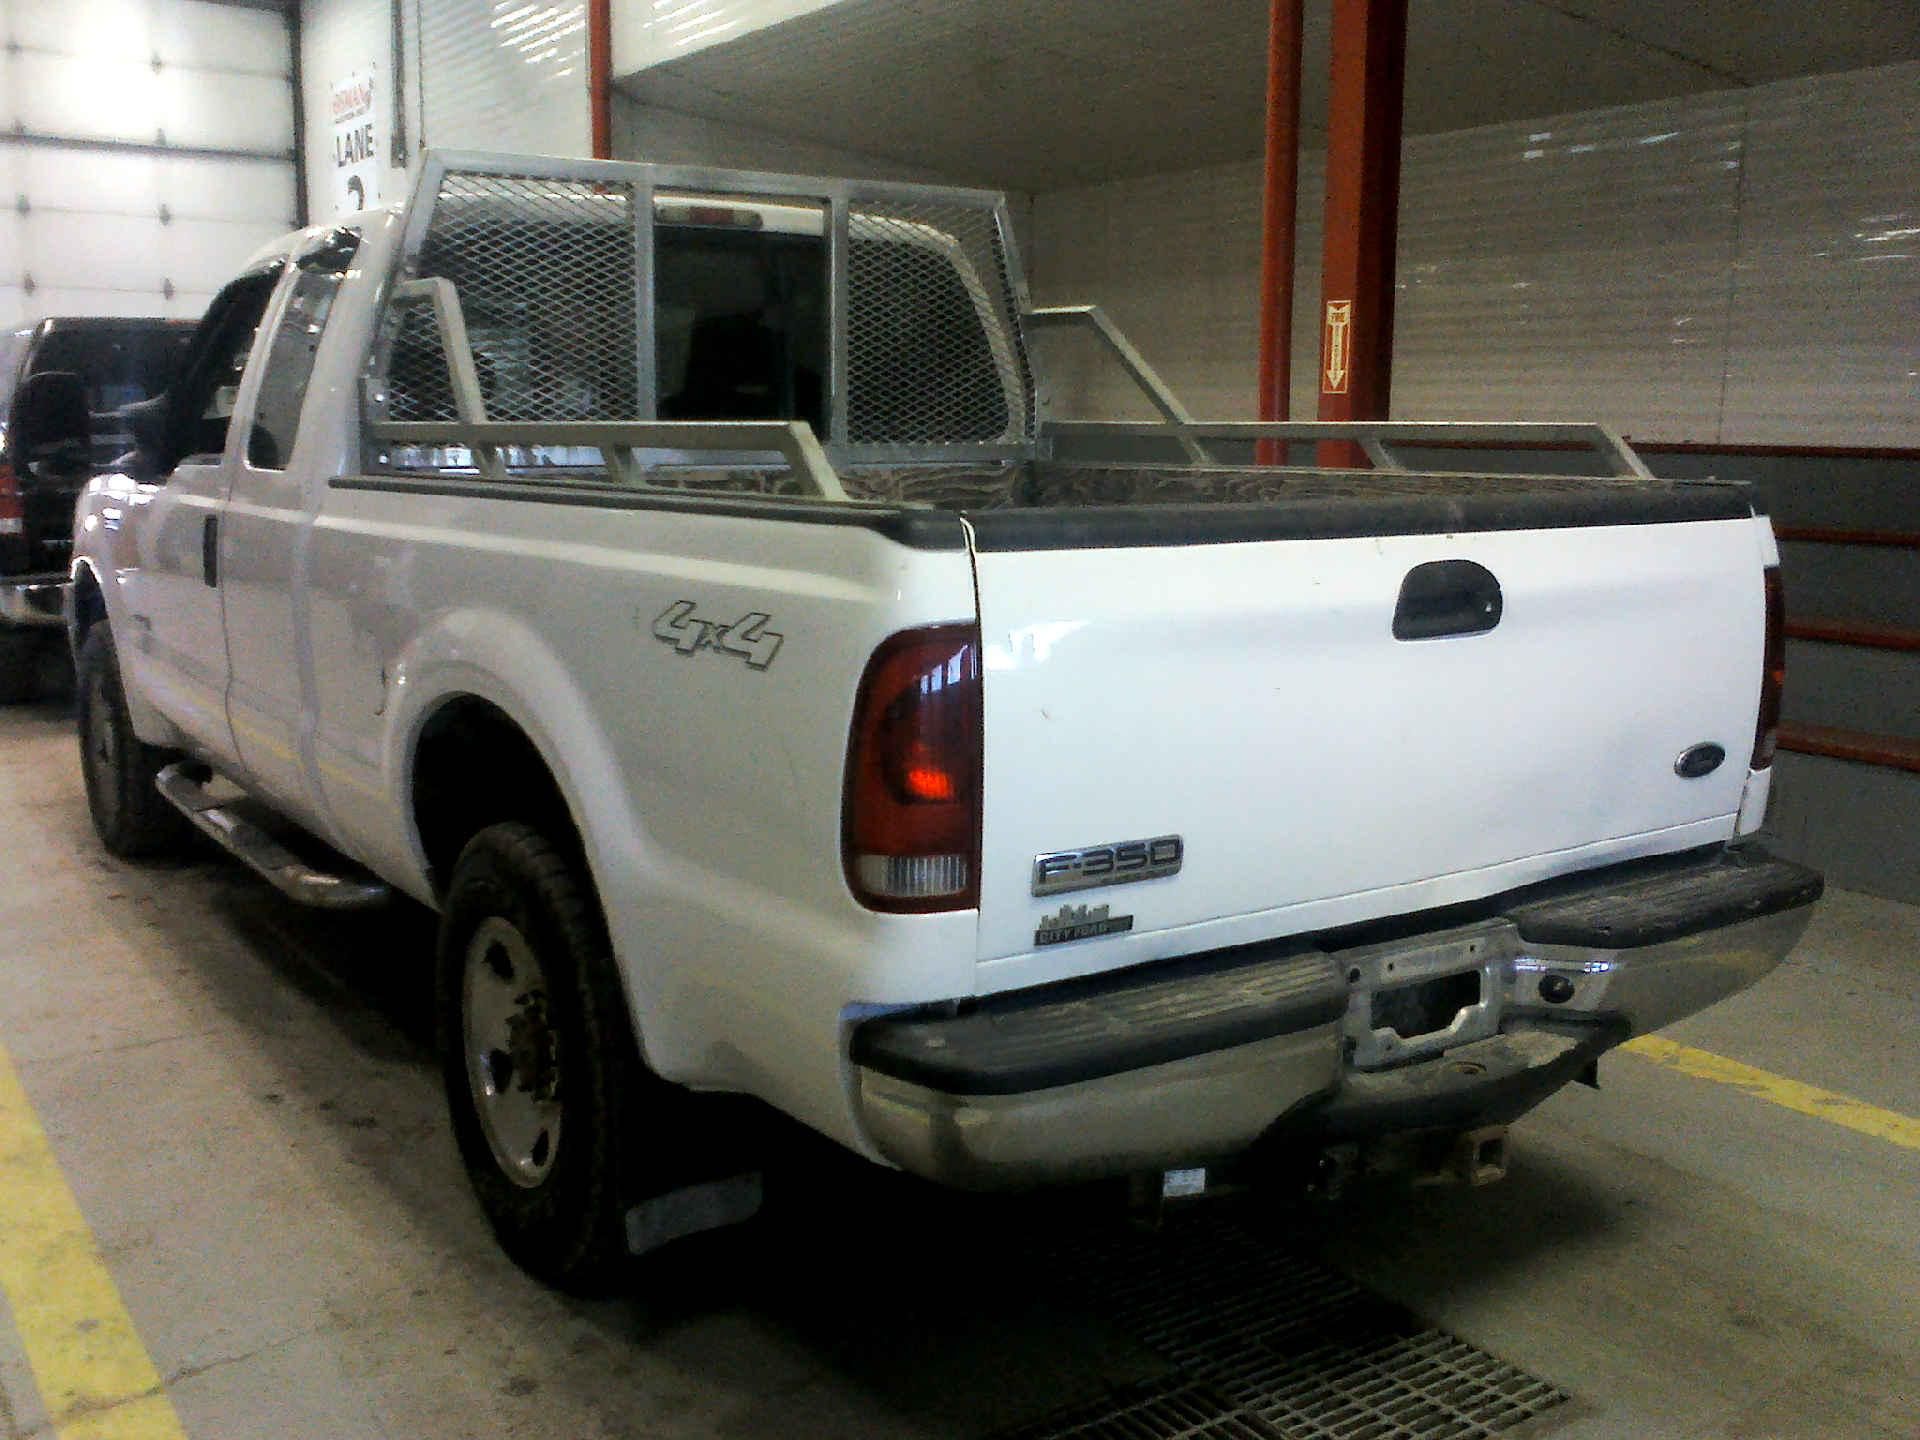 2007 FORD F-250 SD XLT SUPERCAB 4WD 6.0L V8 OHV 32V TURBO DIESEL AUTOMATIC SN:1FTSX21P67EB37050 - Image 2 of 9